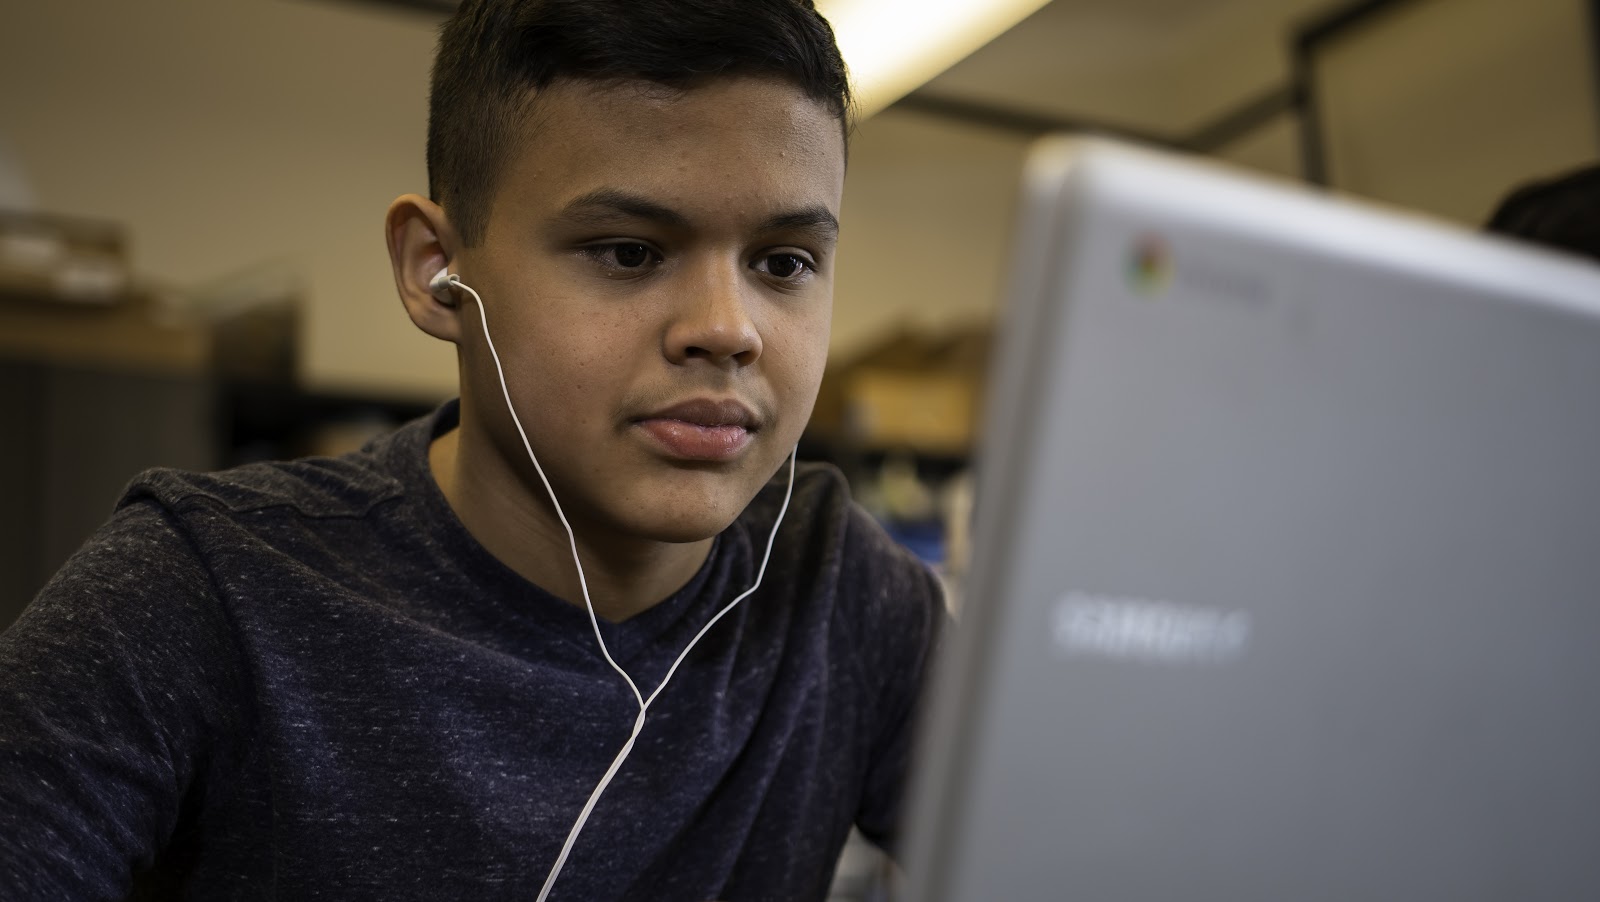 Student works at computer with headphones